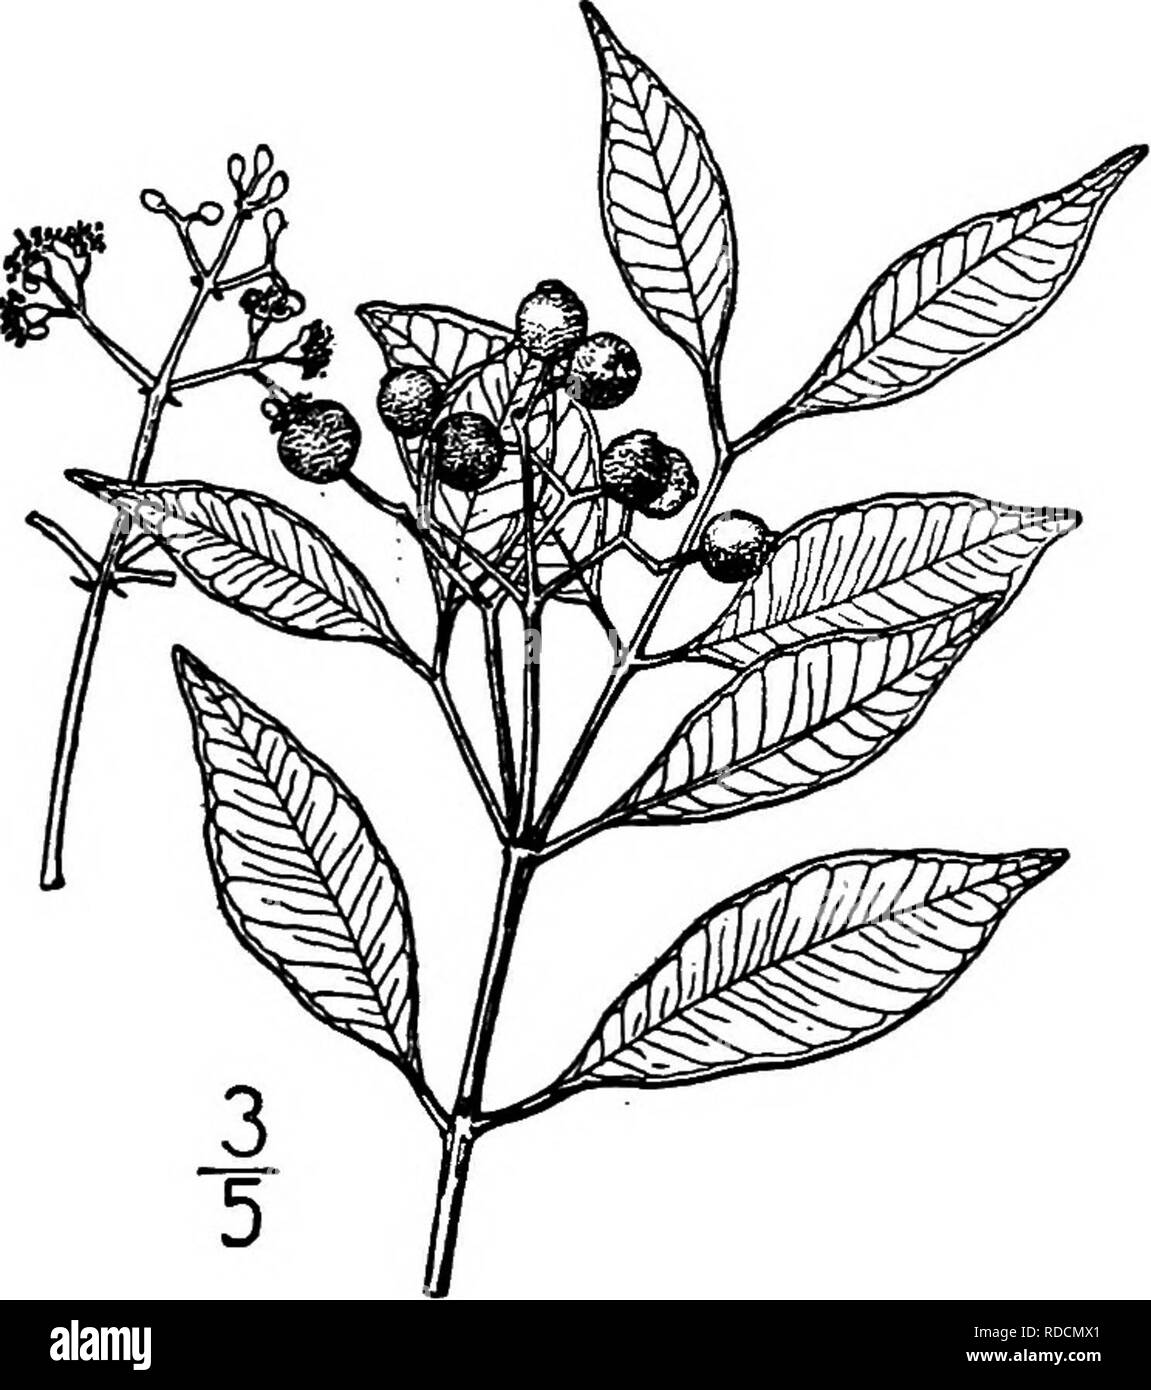 . North American trees : being descriptions and illustrations of the trees growing independently of cultivation in North America, north of Mexico and the West Indies . Trees. 730 Spicewood IV. SPICEWOOD GENUS CALYPTBANTHES SWARTZ Species Calyptranthes pallens (Poiret) Grisebach Eugenia pallens Poiret. Calyptranthes Chytraculia West, not Swartz HIS tropical tree or shrub, enters our area in southern peninsular Florida and the Keys, where it occurs in hammocks near the coast. It is common on many of the West Indian islands, attaining a maximum height of 8 meters, with a trunk diameter of about i Stock Photo